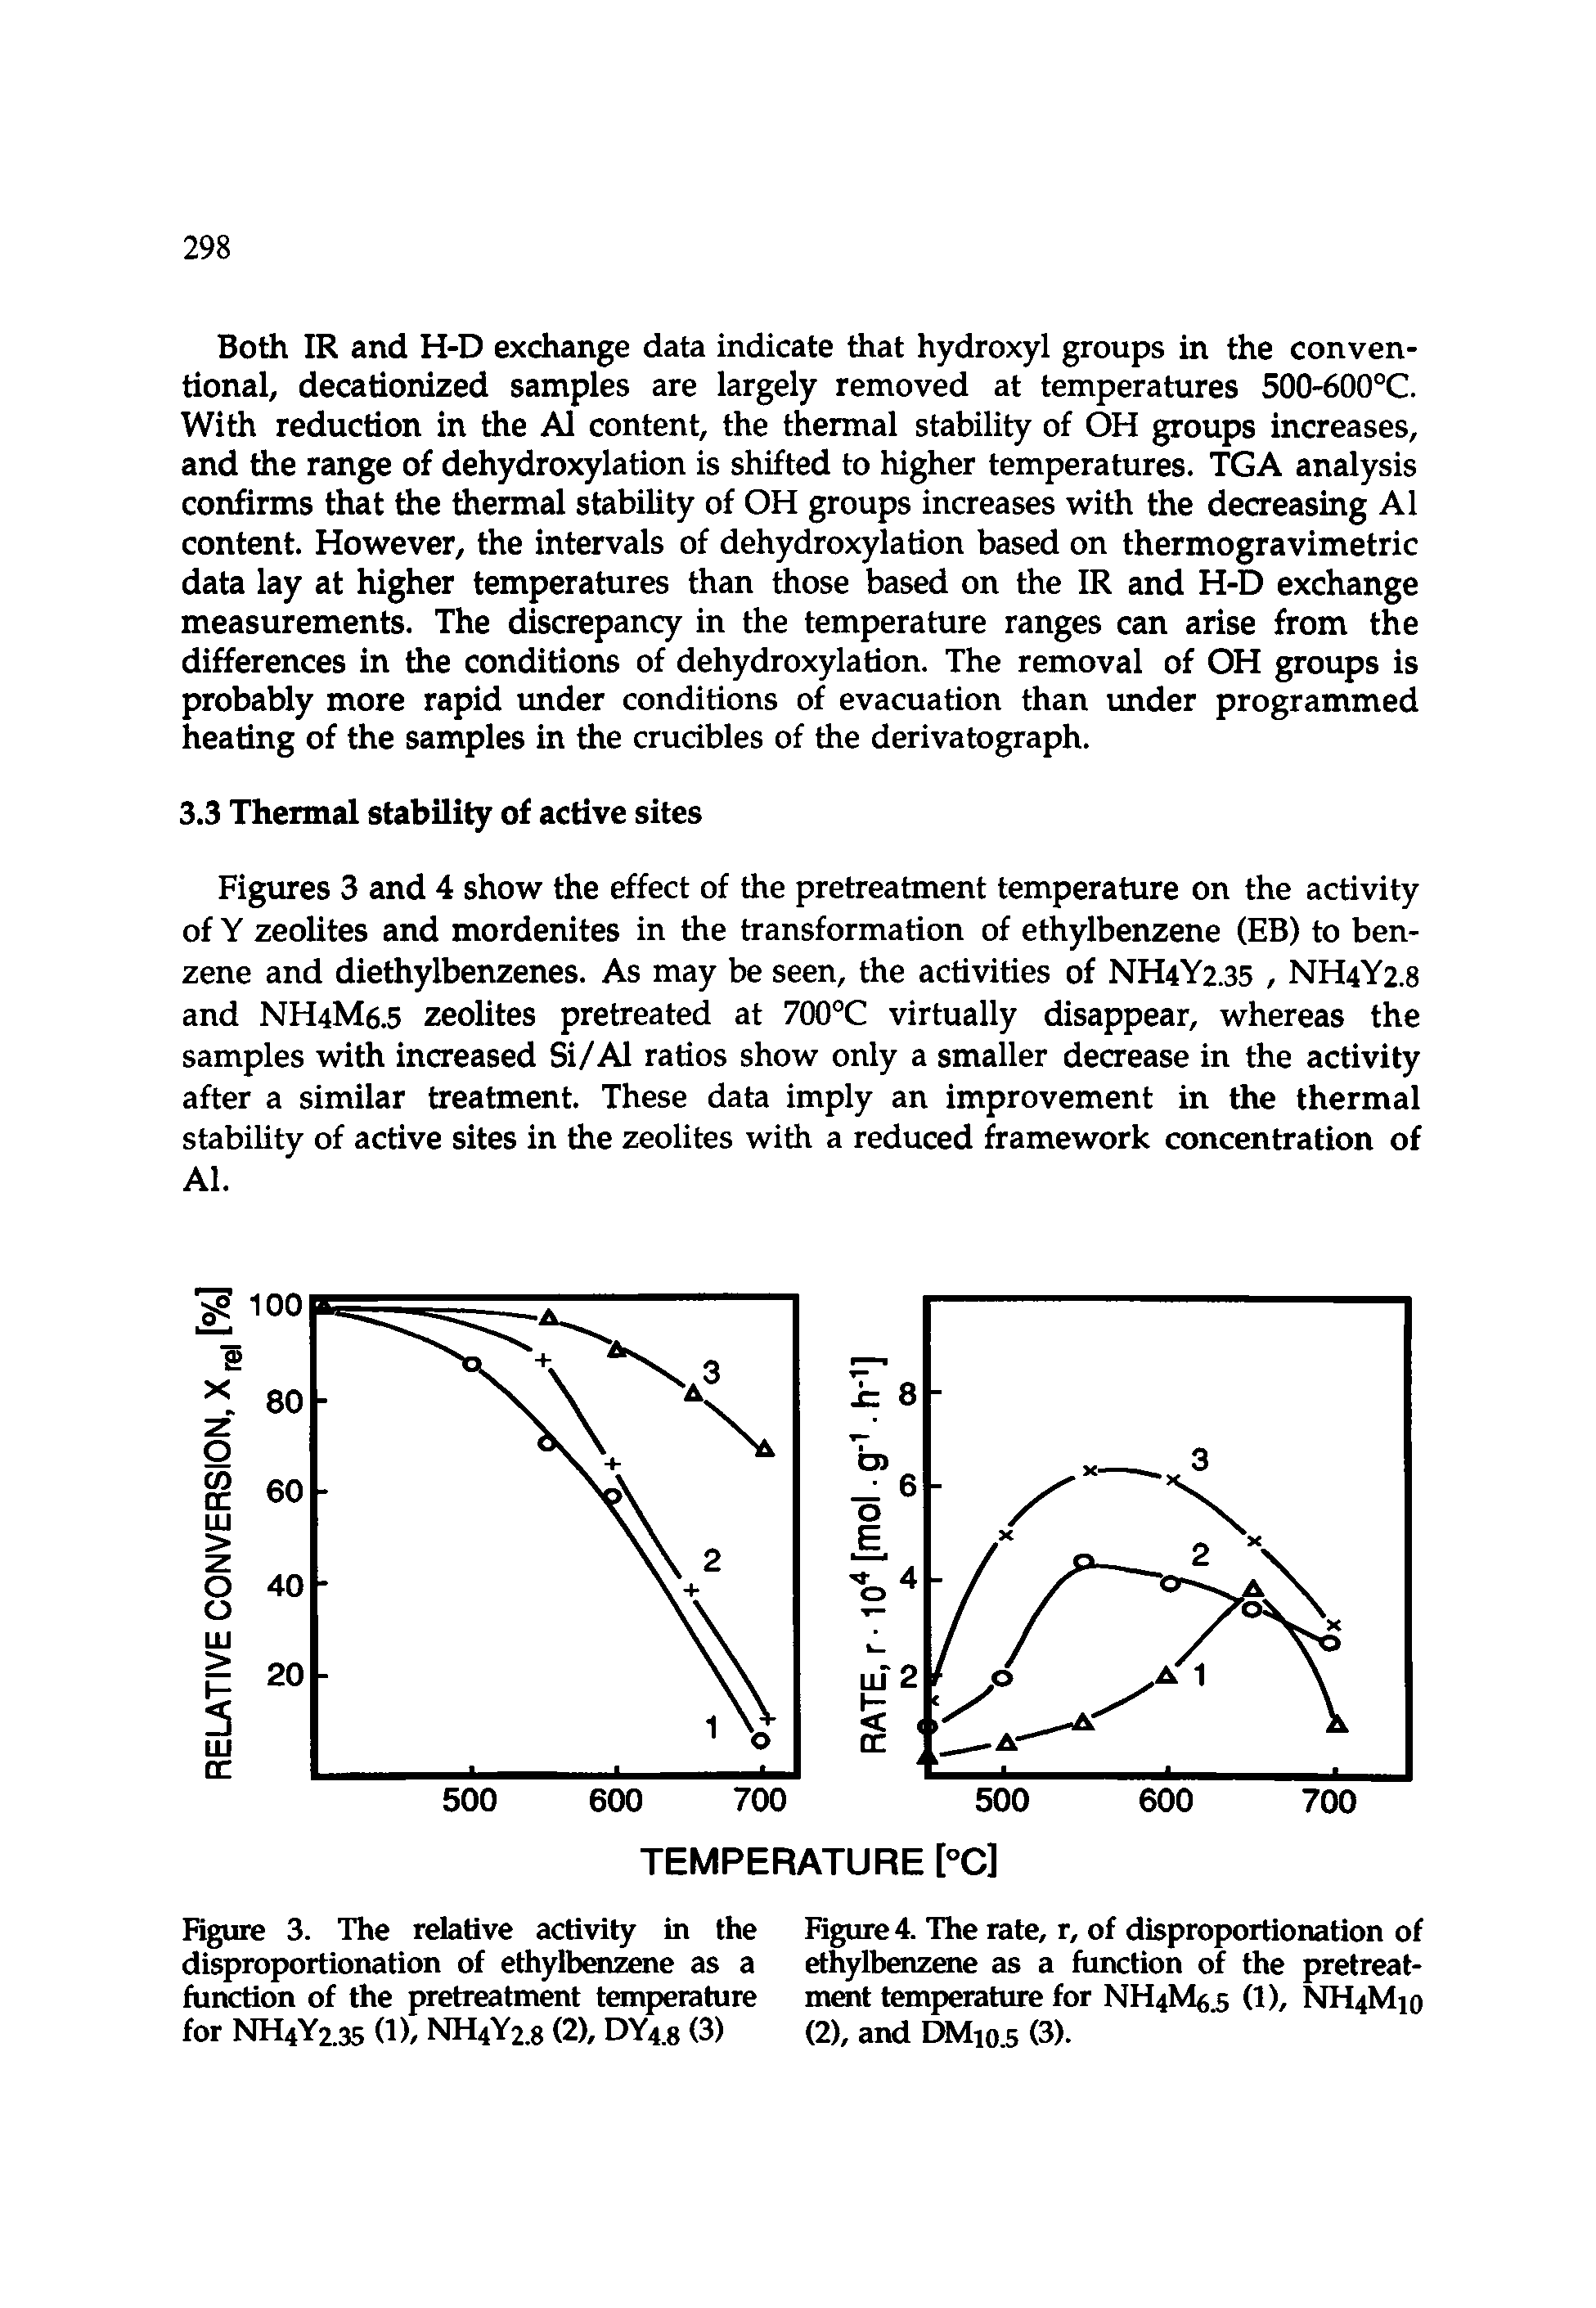 Figures 3 and 4 show the effect of the pretreatment temperature on the activity of Y zeolites and mordenites in the transformation of ethylbenzene (EB) to benzene and diethylbenzenes. As may be seen, the activities of NH4Y2.35, NH4Y2.8 and NH4M6.5 zeolites pretreated at 700°C virtually disappear, whereas the samples with increased Si/Al ratios show only a smaller deaease in the activity after a similar treatment. These data imply an improvement in the thermal stability of active sites in the zeolites with a reduced framework concentration of Al.